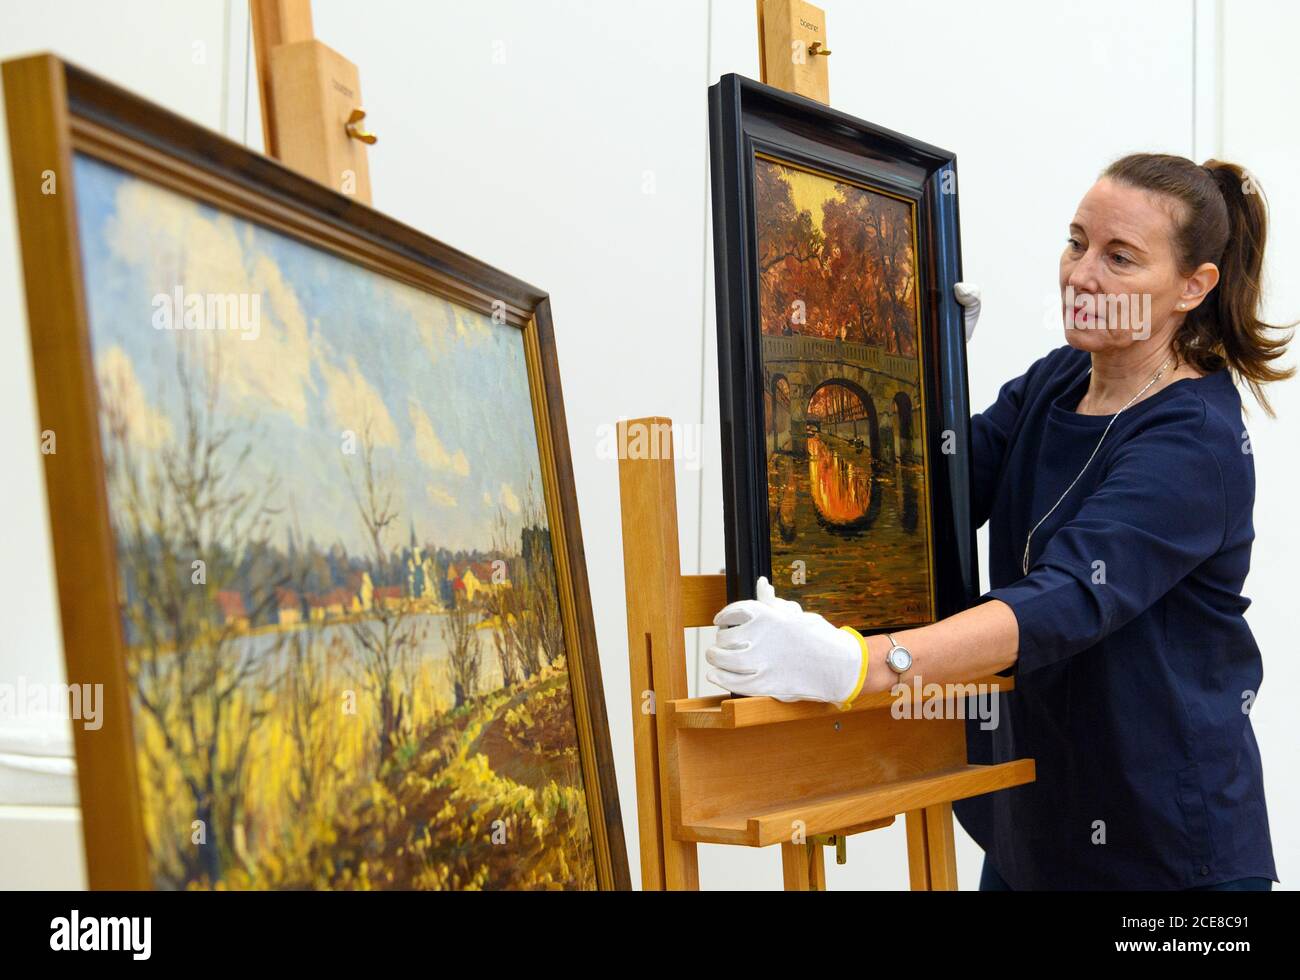 31 August 2020, Brandenburg, Potsdam: Jutta Götzmann, director of the Potsdam Museum - Forum for Art and History, takes the oil painting 'Kellertorbrücke' (Cellar Gate Bridge) by the Potsdam painter Max Friedrich Koch (1859 - 1930) from the easel after a press conference on the donation of two paintings. The painting was in the possession of a family from Neuss, lay for a long time packed in rubbish bags on a cupboard and was offered on 30.01.2020 in the ZDF programme 'Bares für Rares'. Instead of the hoped-for 300 euros for the oil painting, mother and daughter received 1650 euros from a Wies Stock Photo